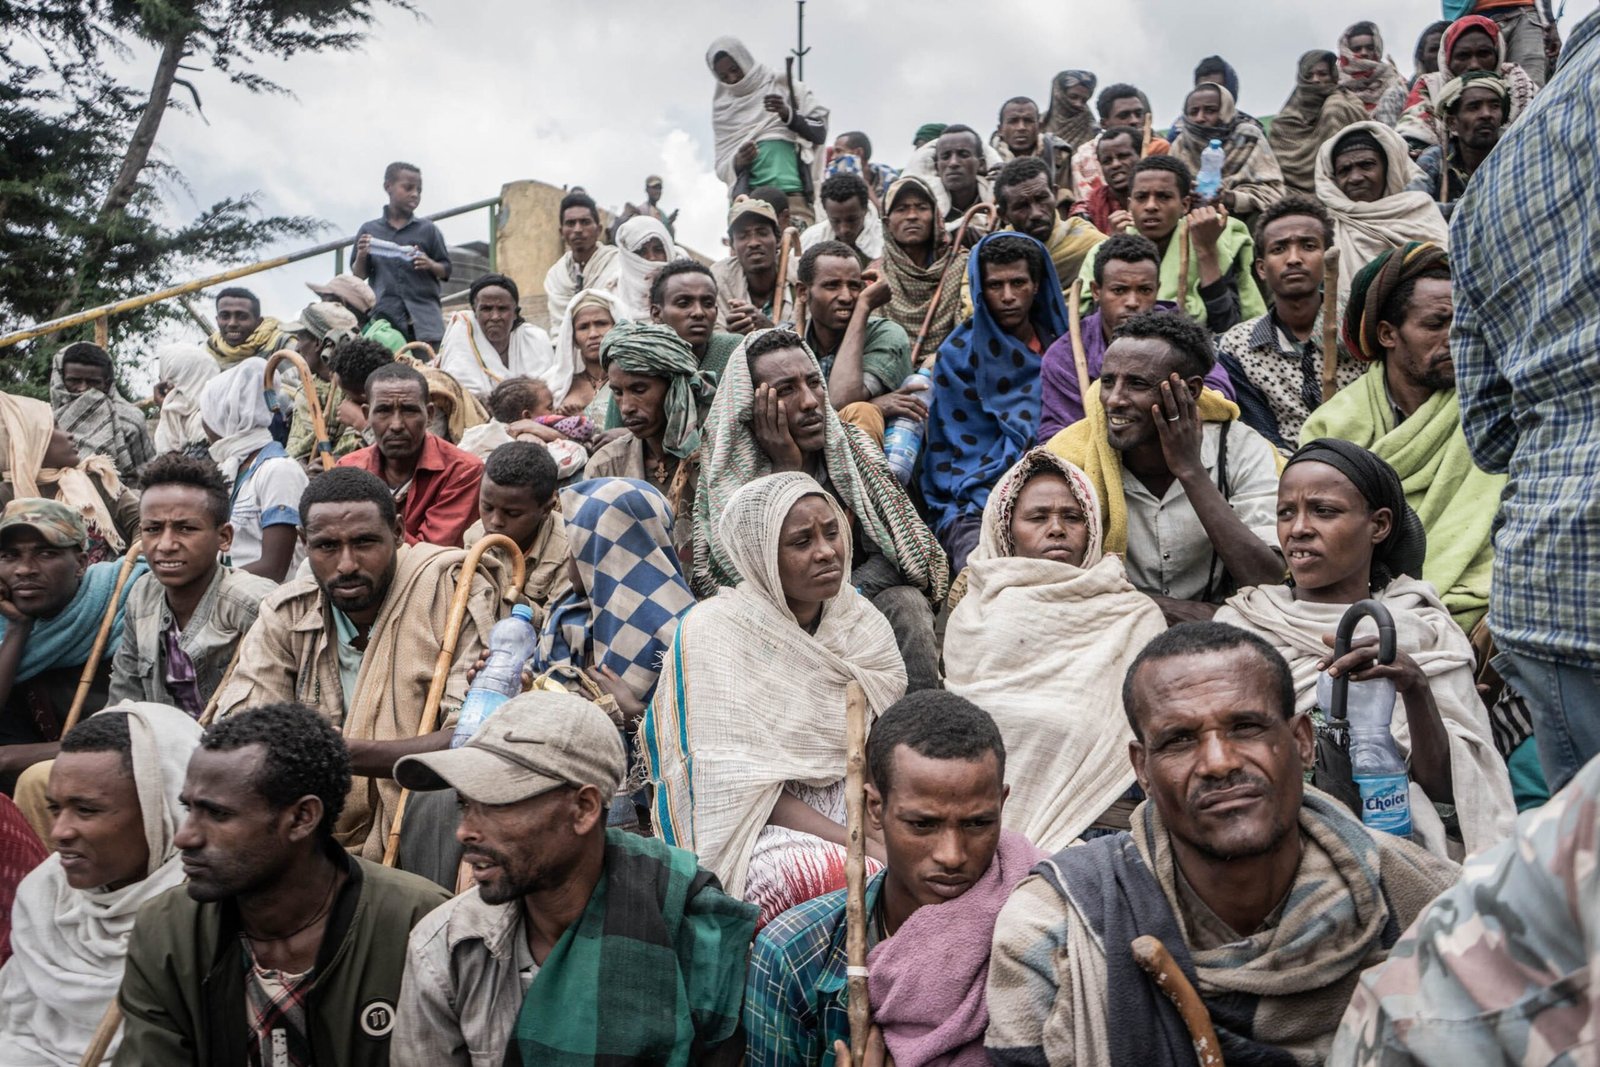 Ethiopia Land Conflict Displaces Thousands, Sparking Human